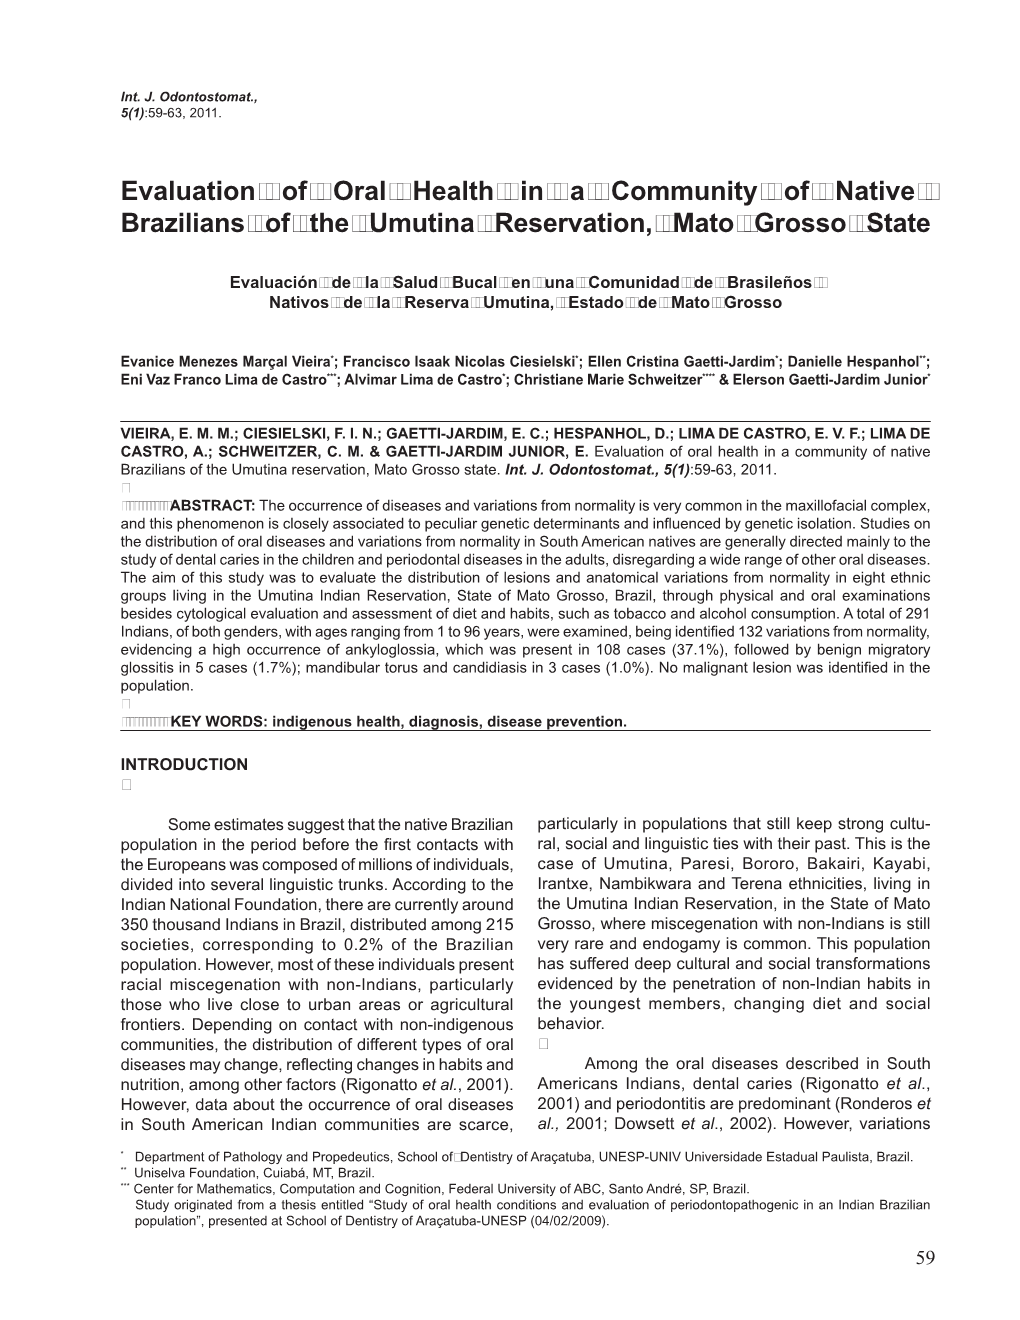 Evaluation of Oral Health in a Community of Native Brazilians of the Umutina Reservation, Mato Grosso State